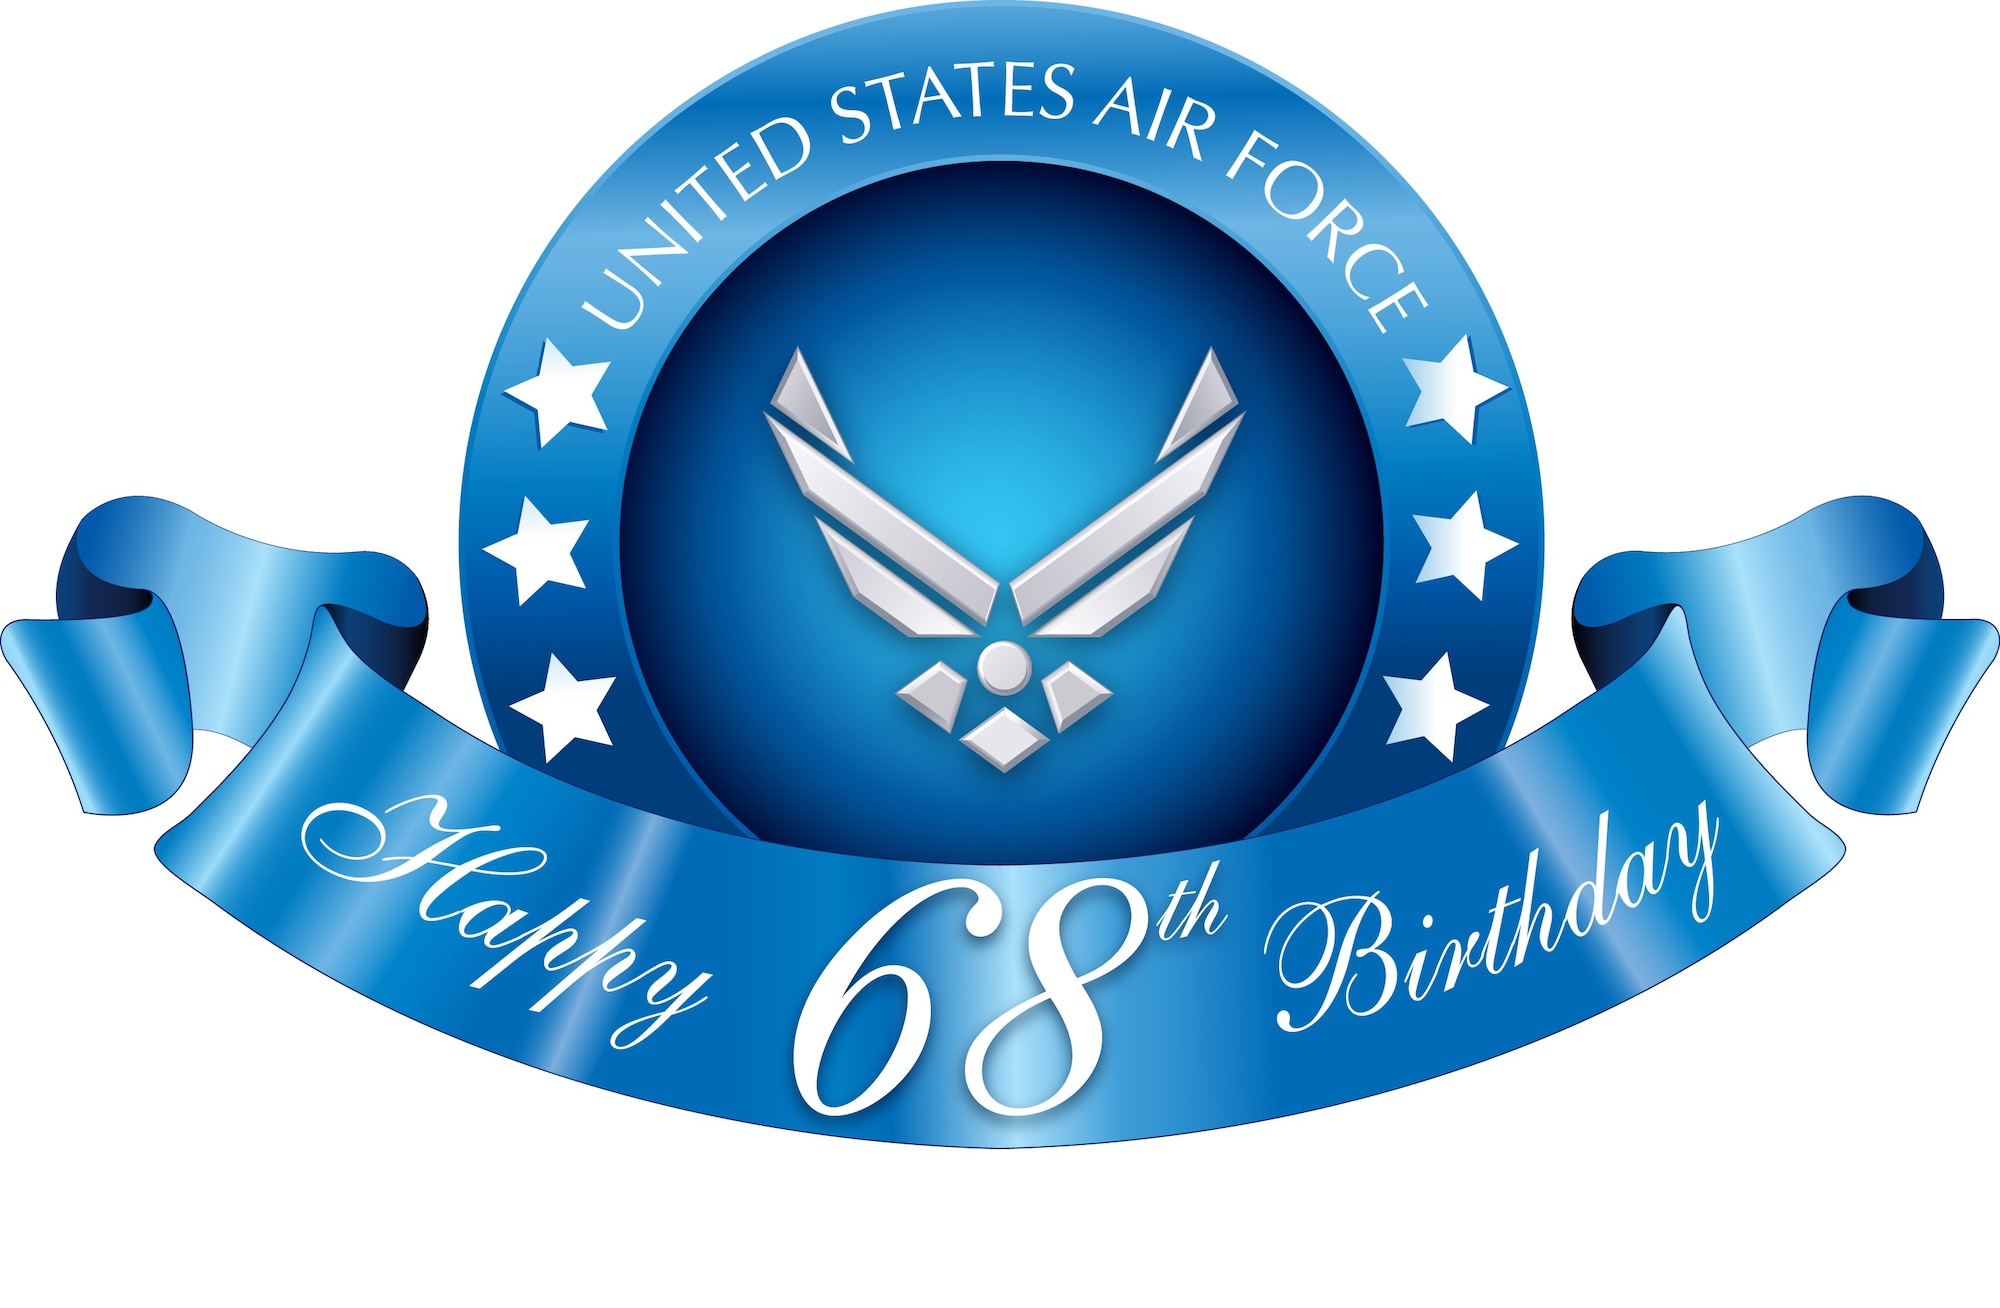 On Sept. 18, 1947, President Harry S. Truman signed the National Security Act of 1947, activating the U.S. Air Force creating a new branch in the military that covers air, space, and cyberspace threats and protects the U.S. citizens against all enemies, foreign and domestic. On Sept. 18, the U.S. Air Force will celebrate 68 years of providing protection and service to the U.S. citizens. (Courtesy graphic)